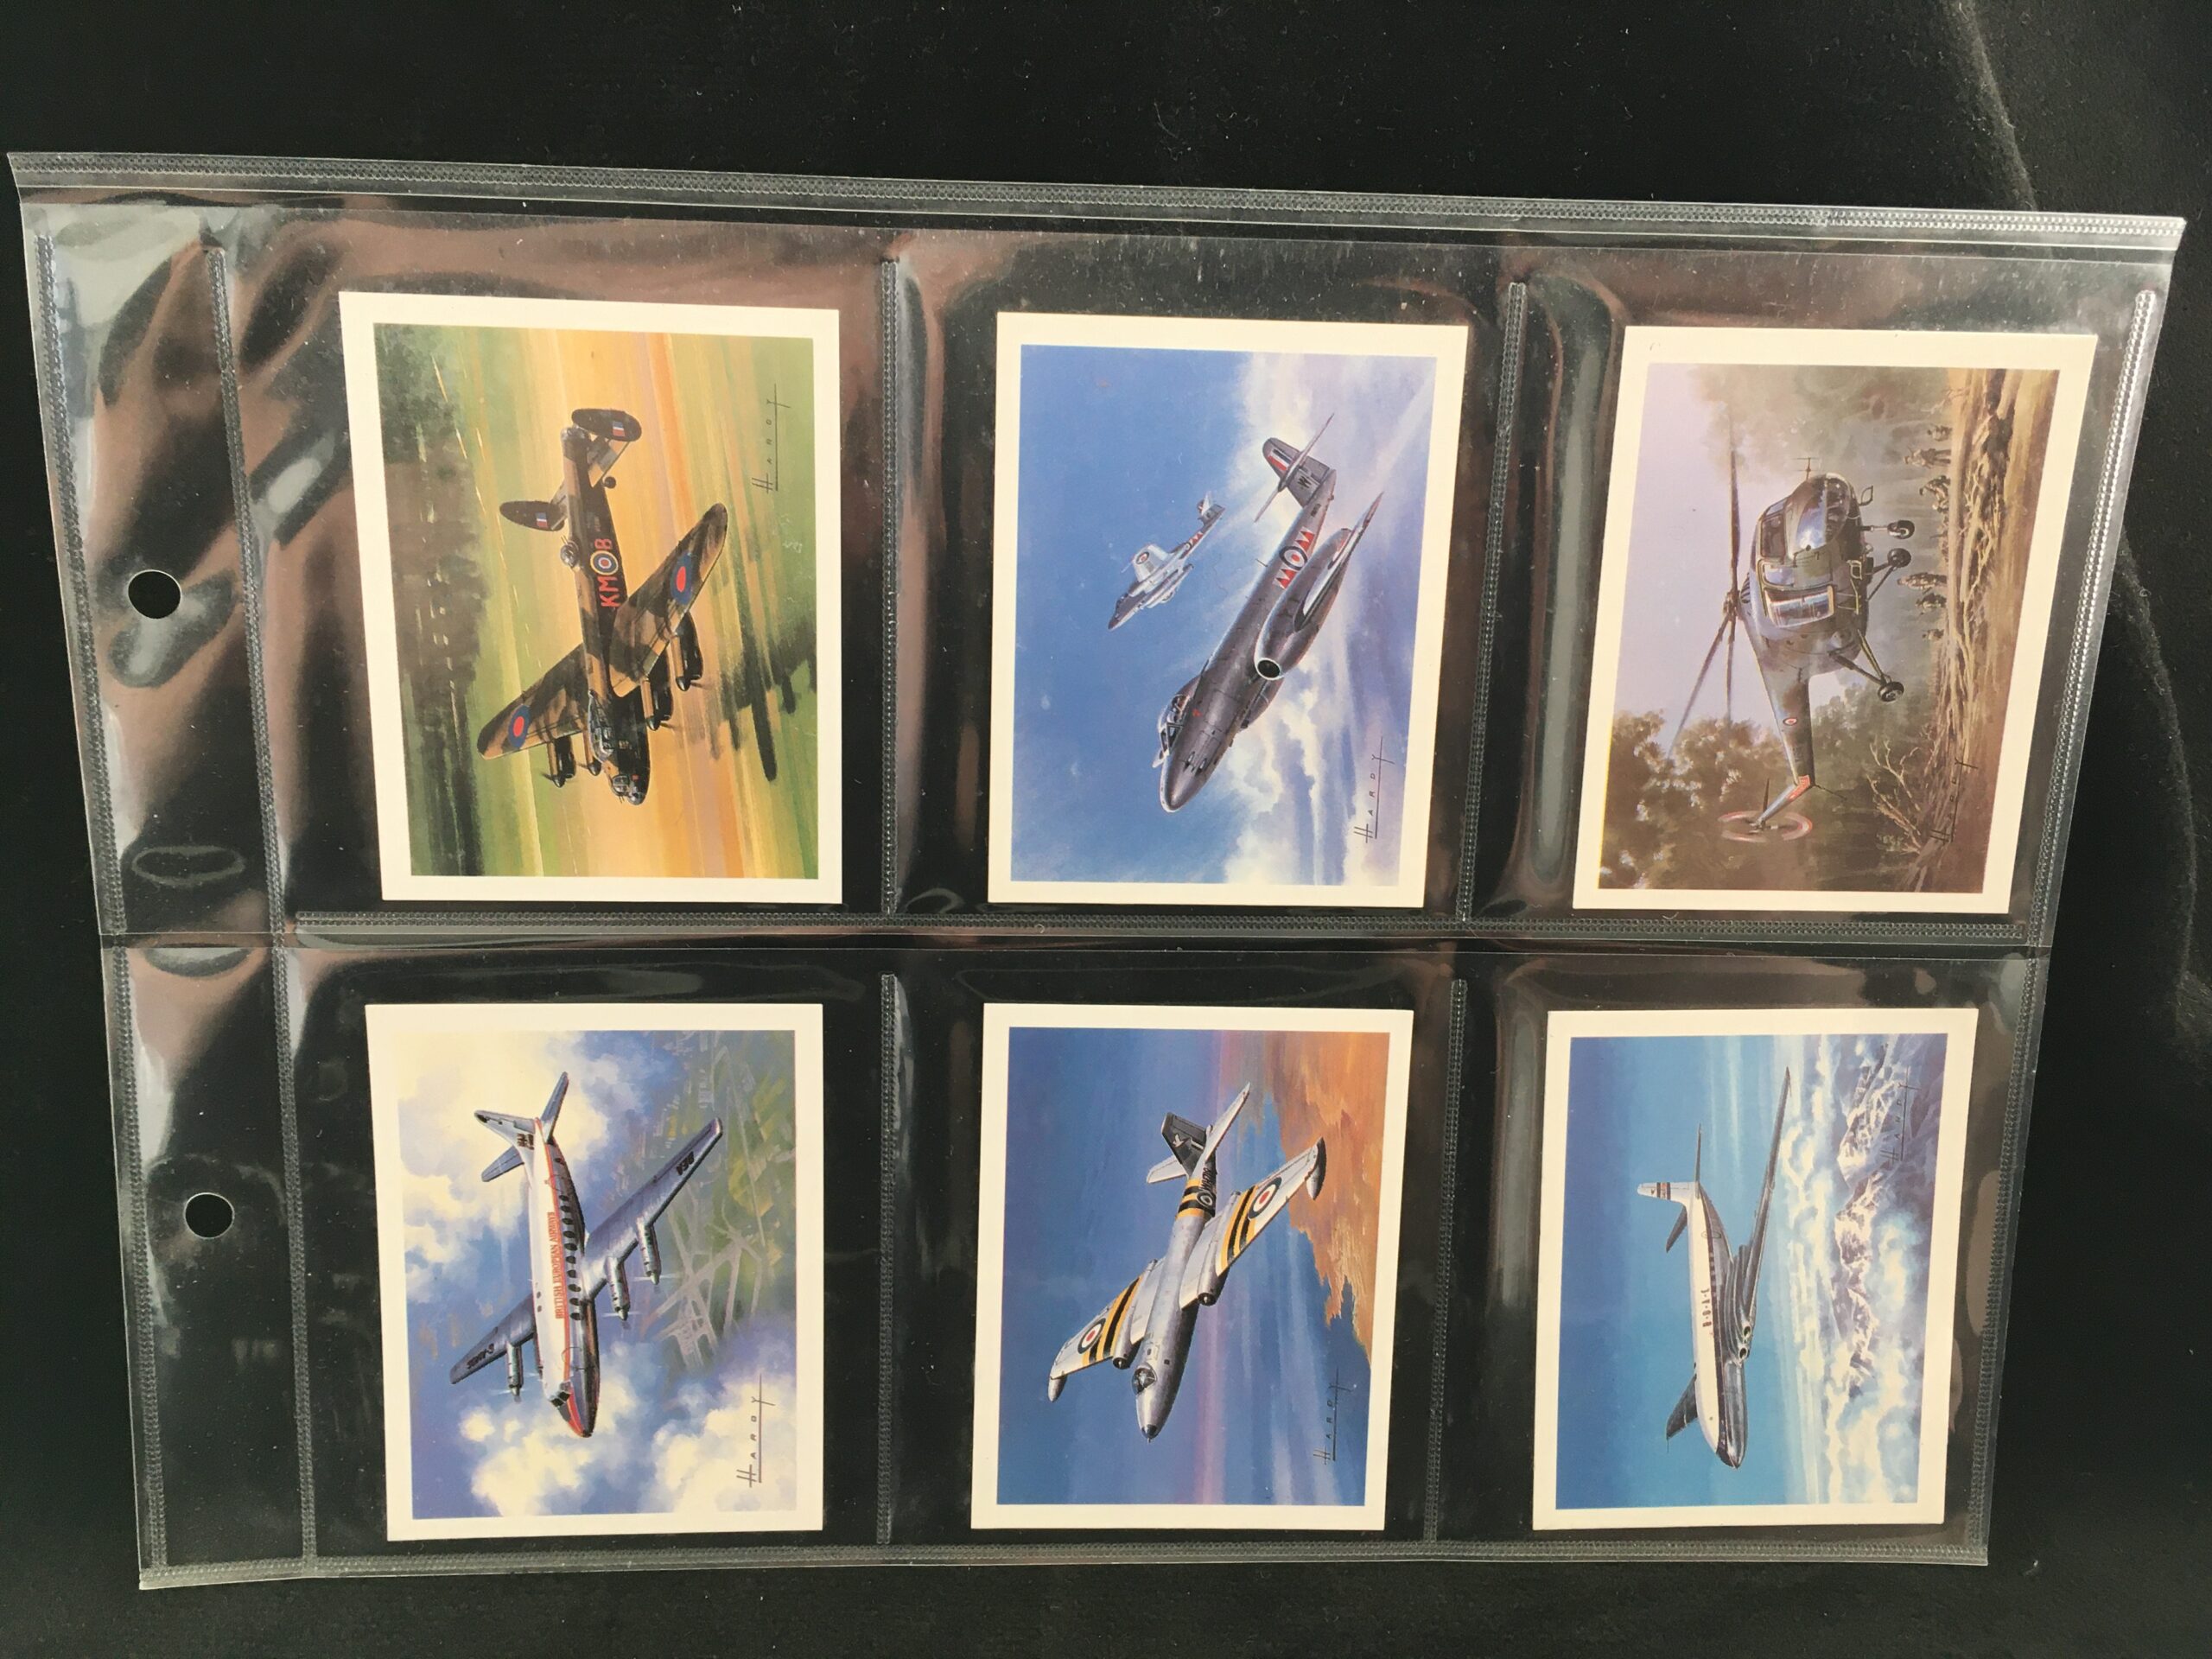 History of British Aviation (1988) - Cigarette cards | Trade cards ...